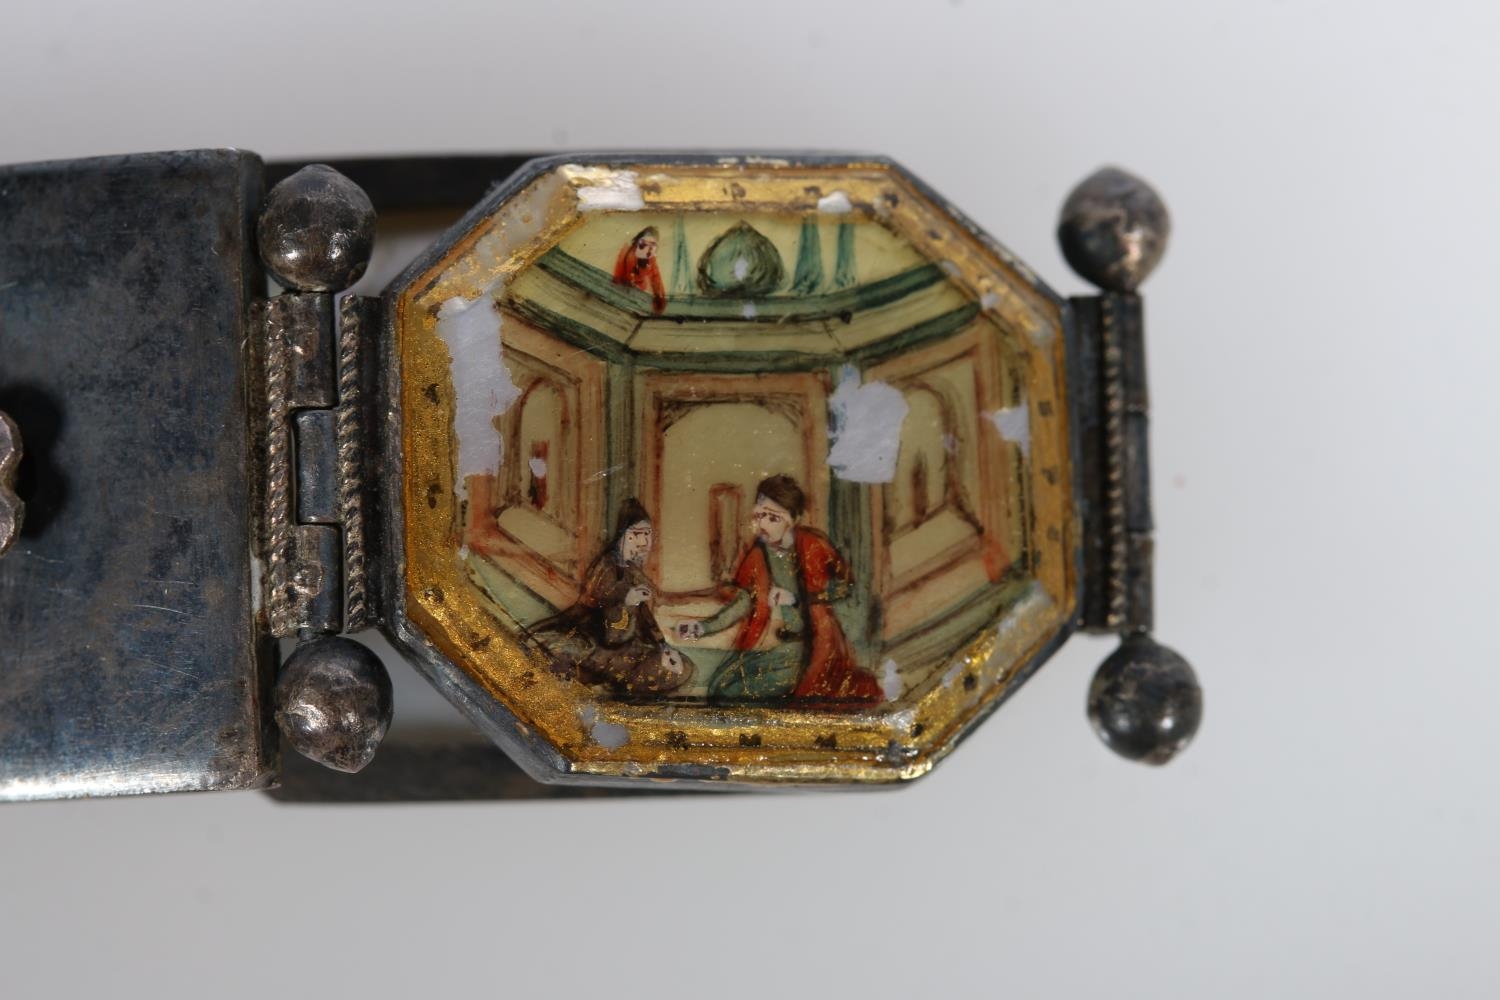 Two Persian bracelets with mother-of-pearl links depicting birds, temple and floral mosaic scenes on - Image 9 of 12